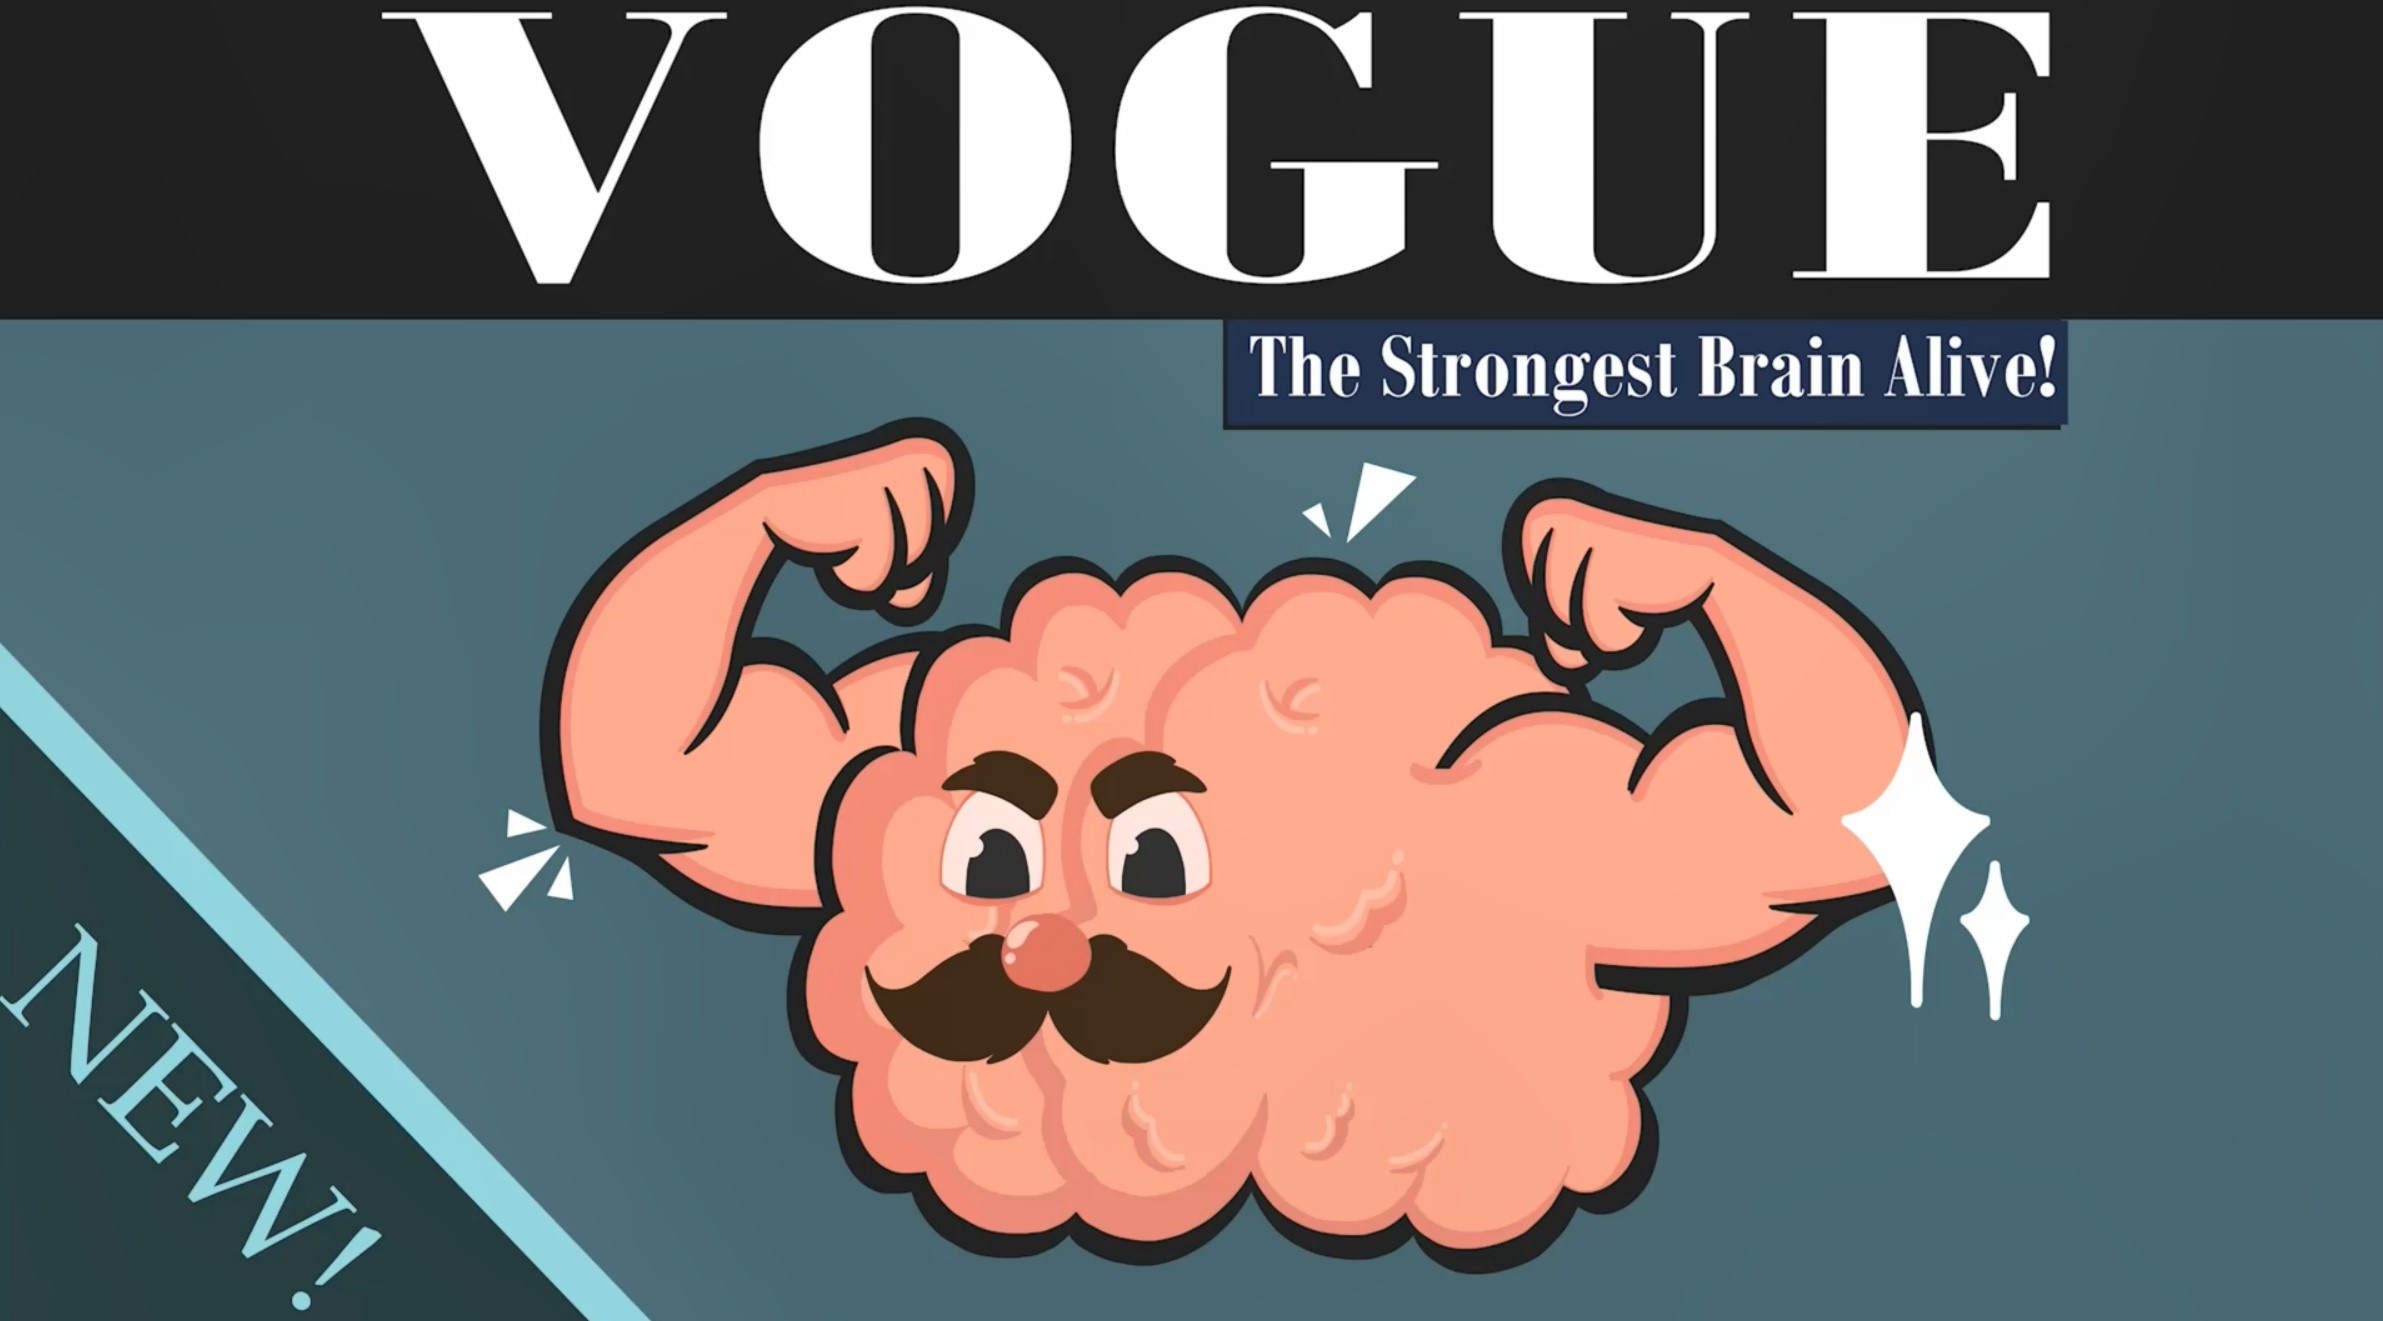 Cartoon image of brain with strongman arms on cover of Vogue magazine captioned with headline "The Strongest Brain Alive".